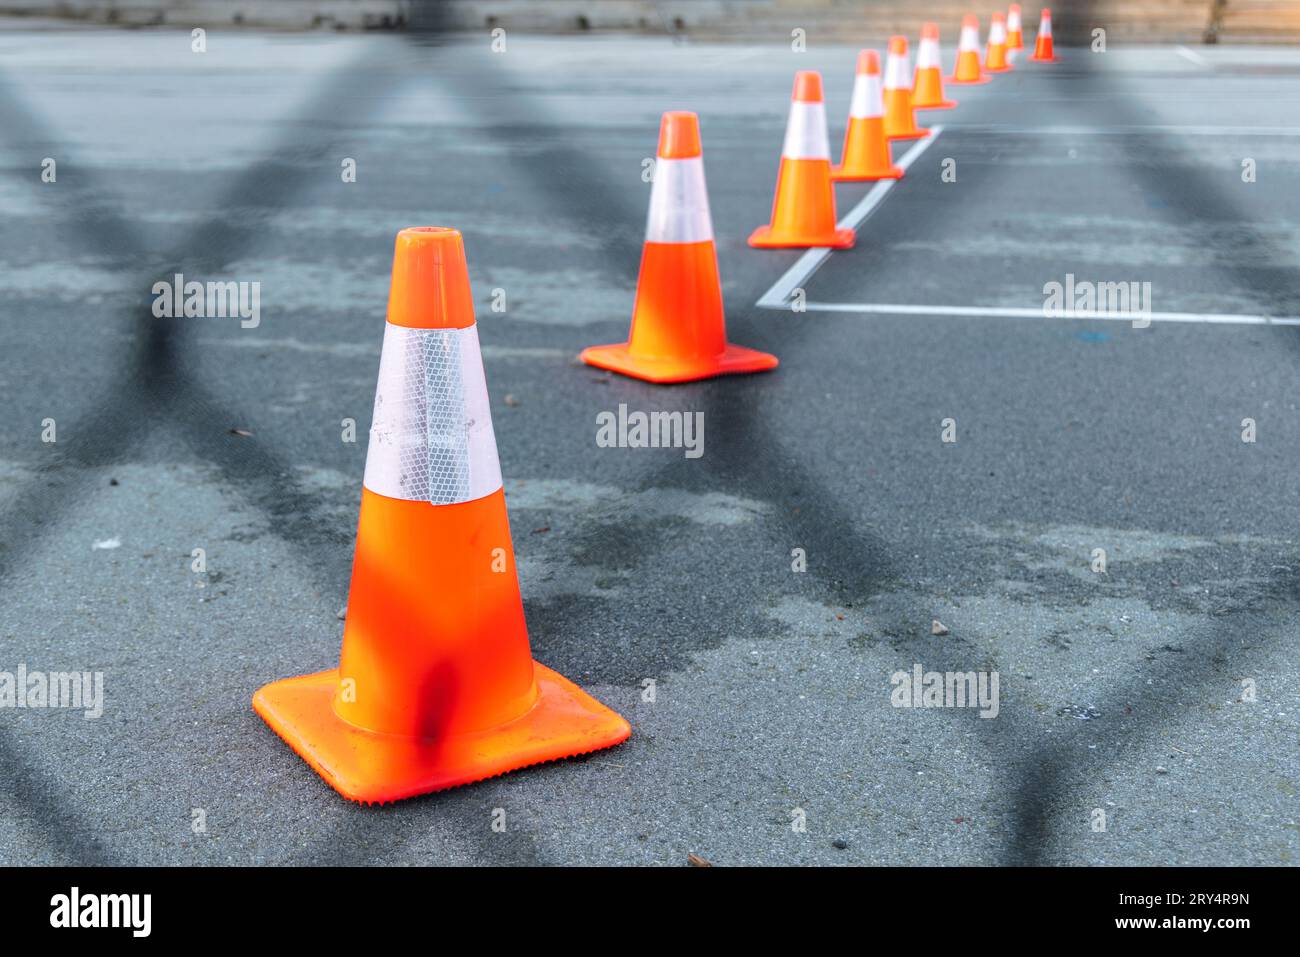 Orange and white traffic cones in a row fading into distance against black tarmac; foreground is a wire fence out of focus. Shot in Vancouver, Canada Stock Photo